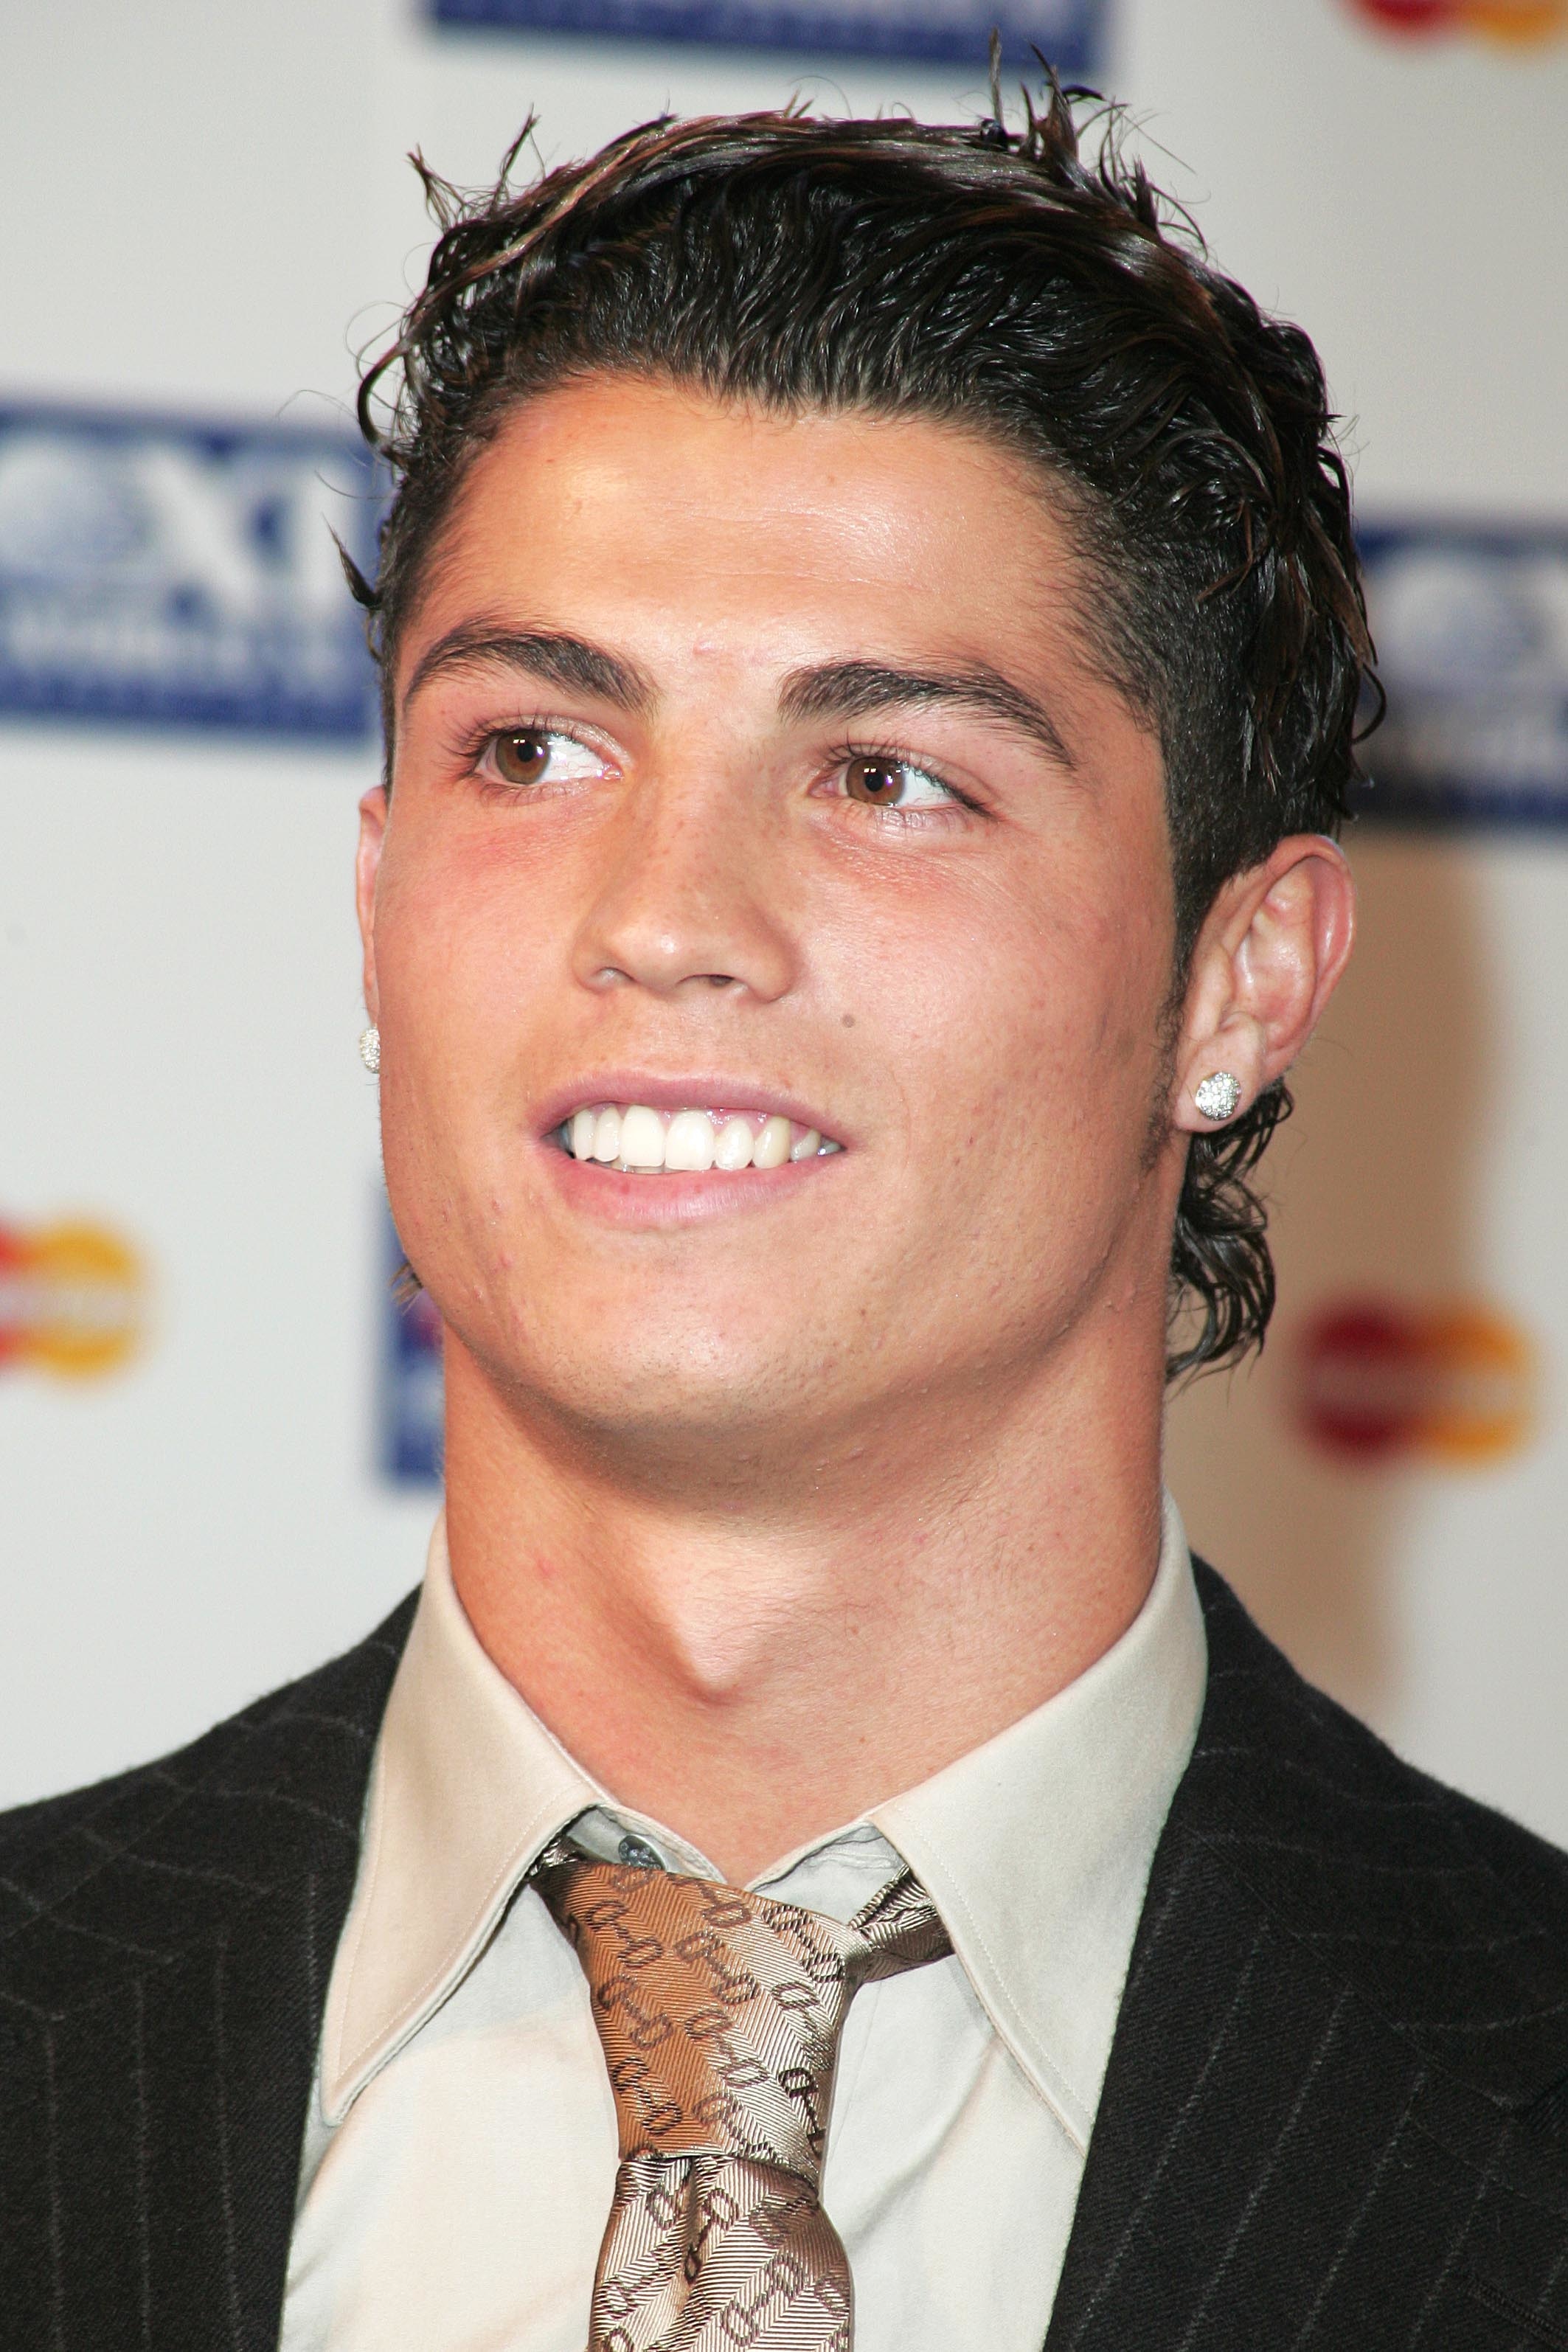 Cristiano Ronaldo at the FIFA Pro World Player of the Year Awards on September 19, 2005, in London, England. | Source: Getty Images